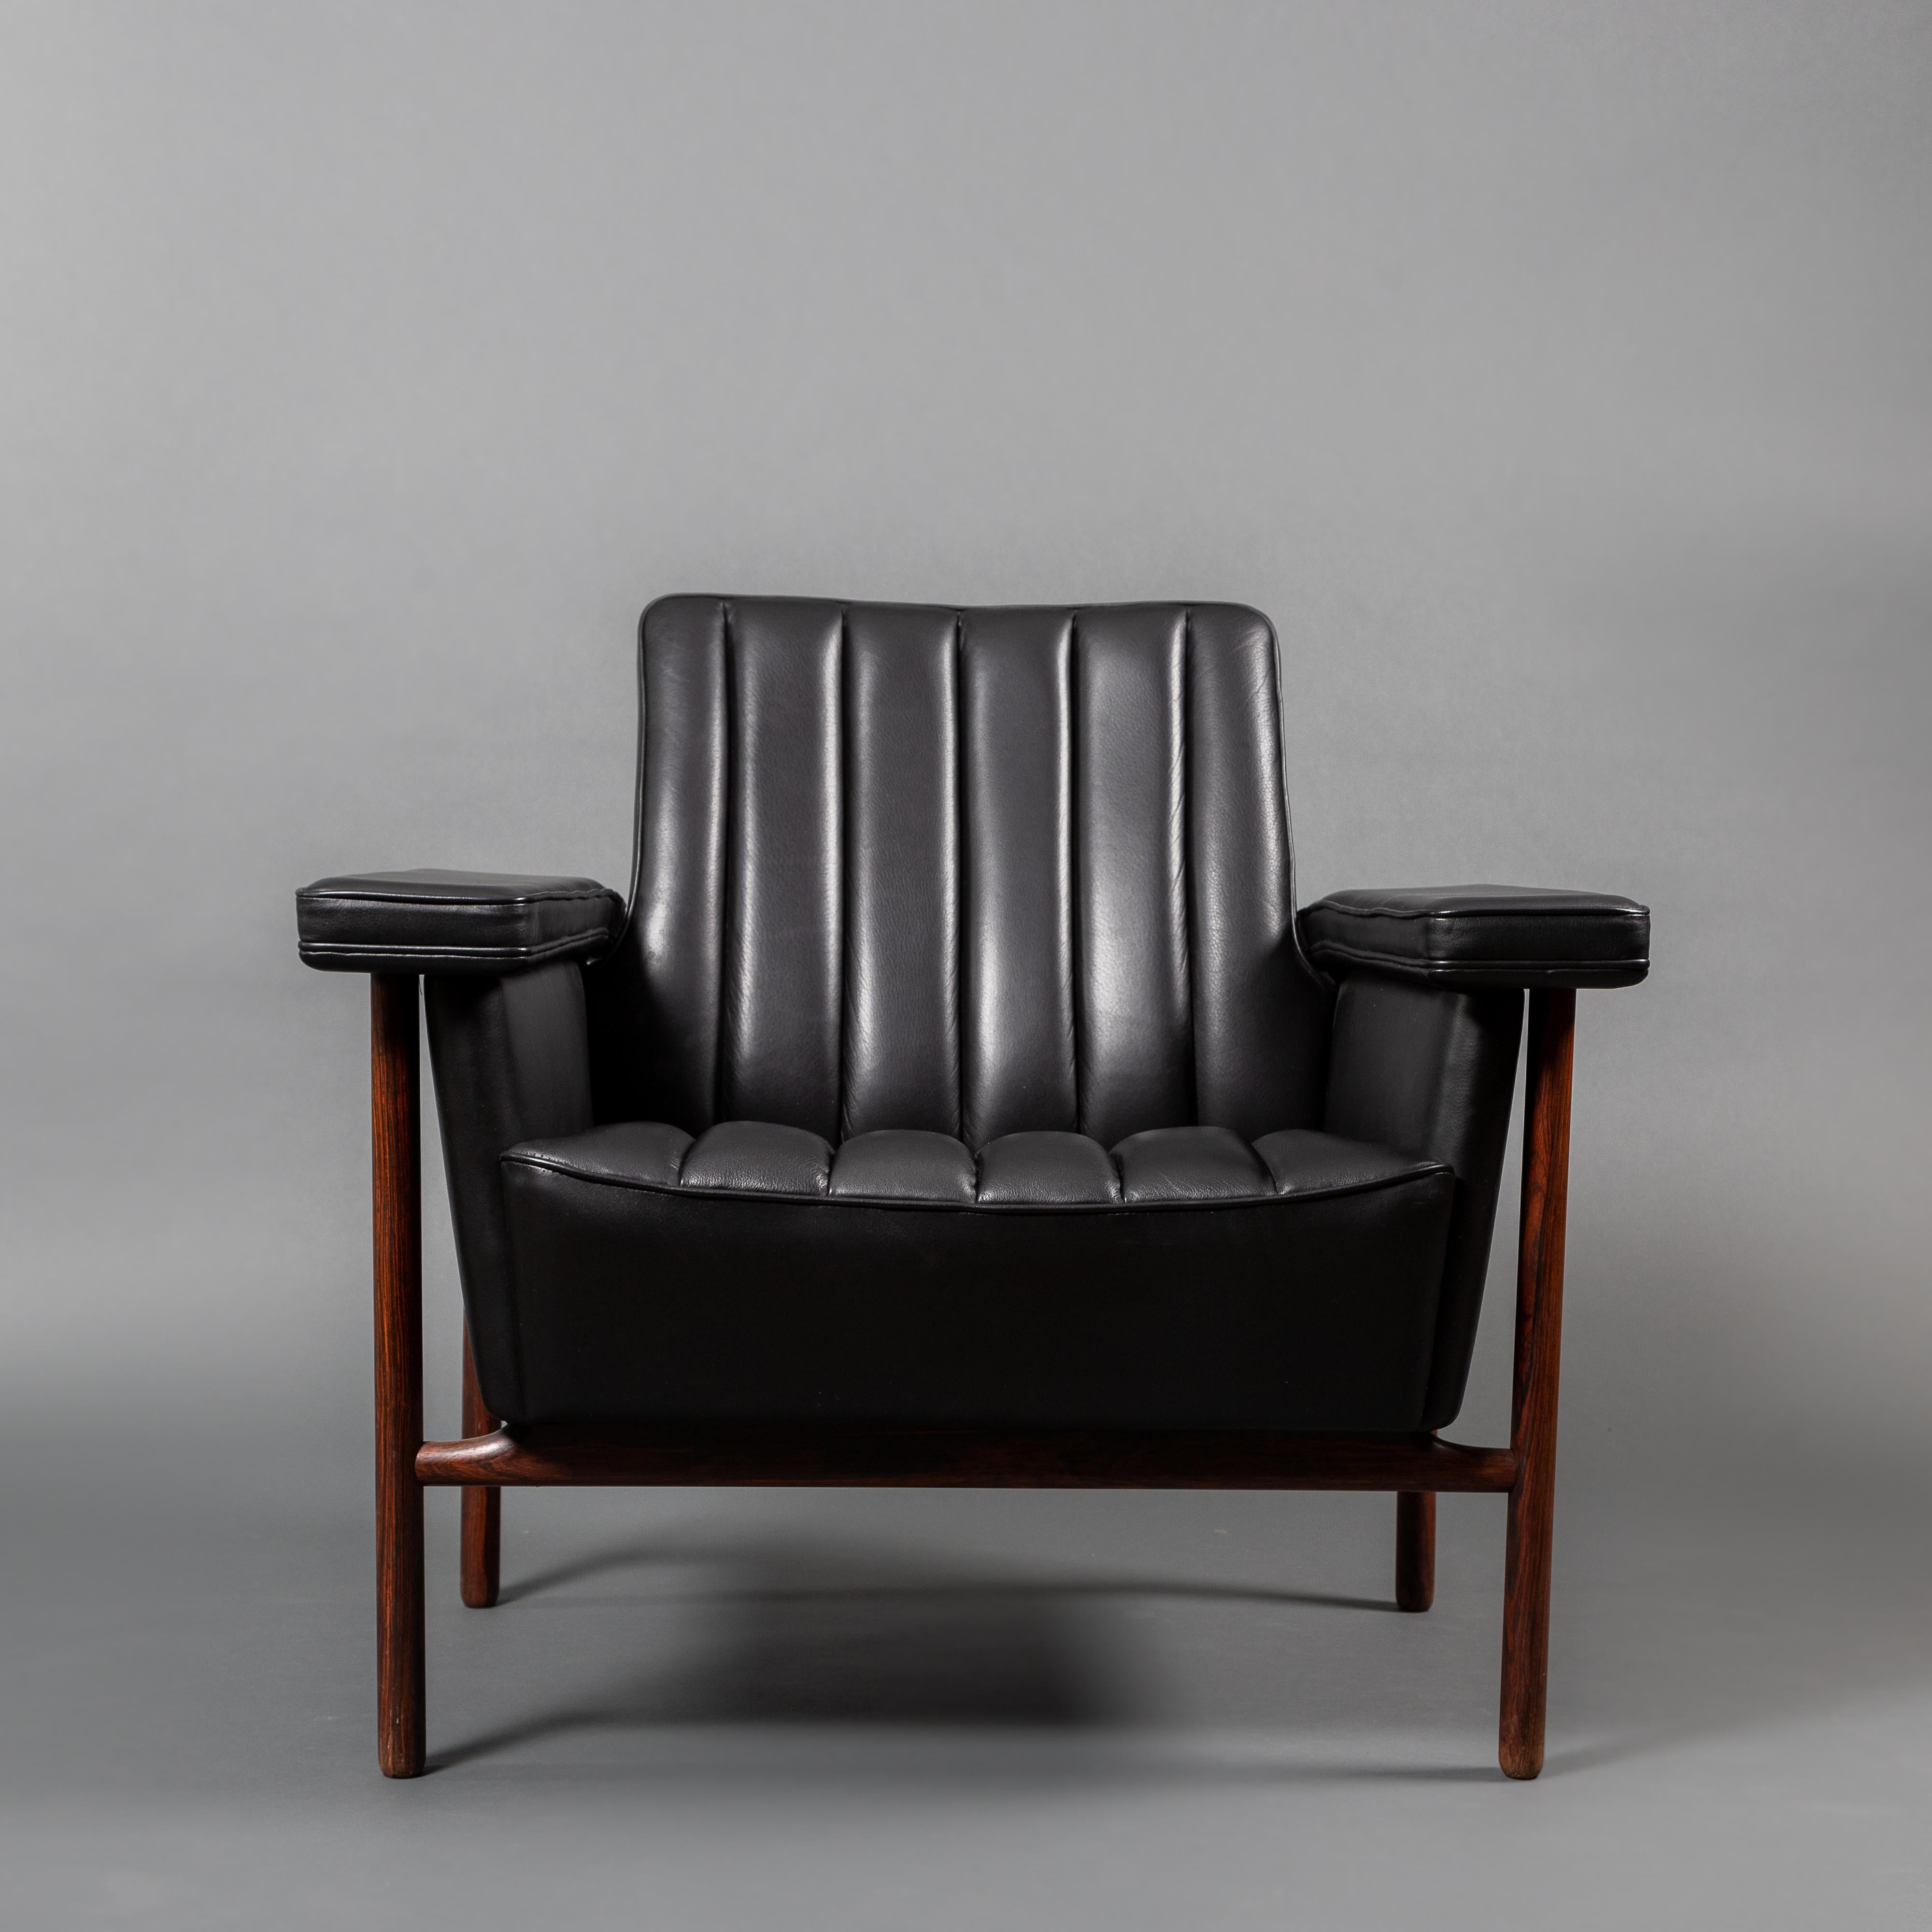 Midcentury Scandinavian Dysthe 1962 black leather rosewood tank chair, Norway.
Rare model 5001 armchair manufactured by Dokka and designed by Sven Ivar Dysthe in 1962. Base in massive Brazilian rosewood fully reupholstered with aniline leather from